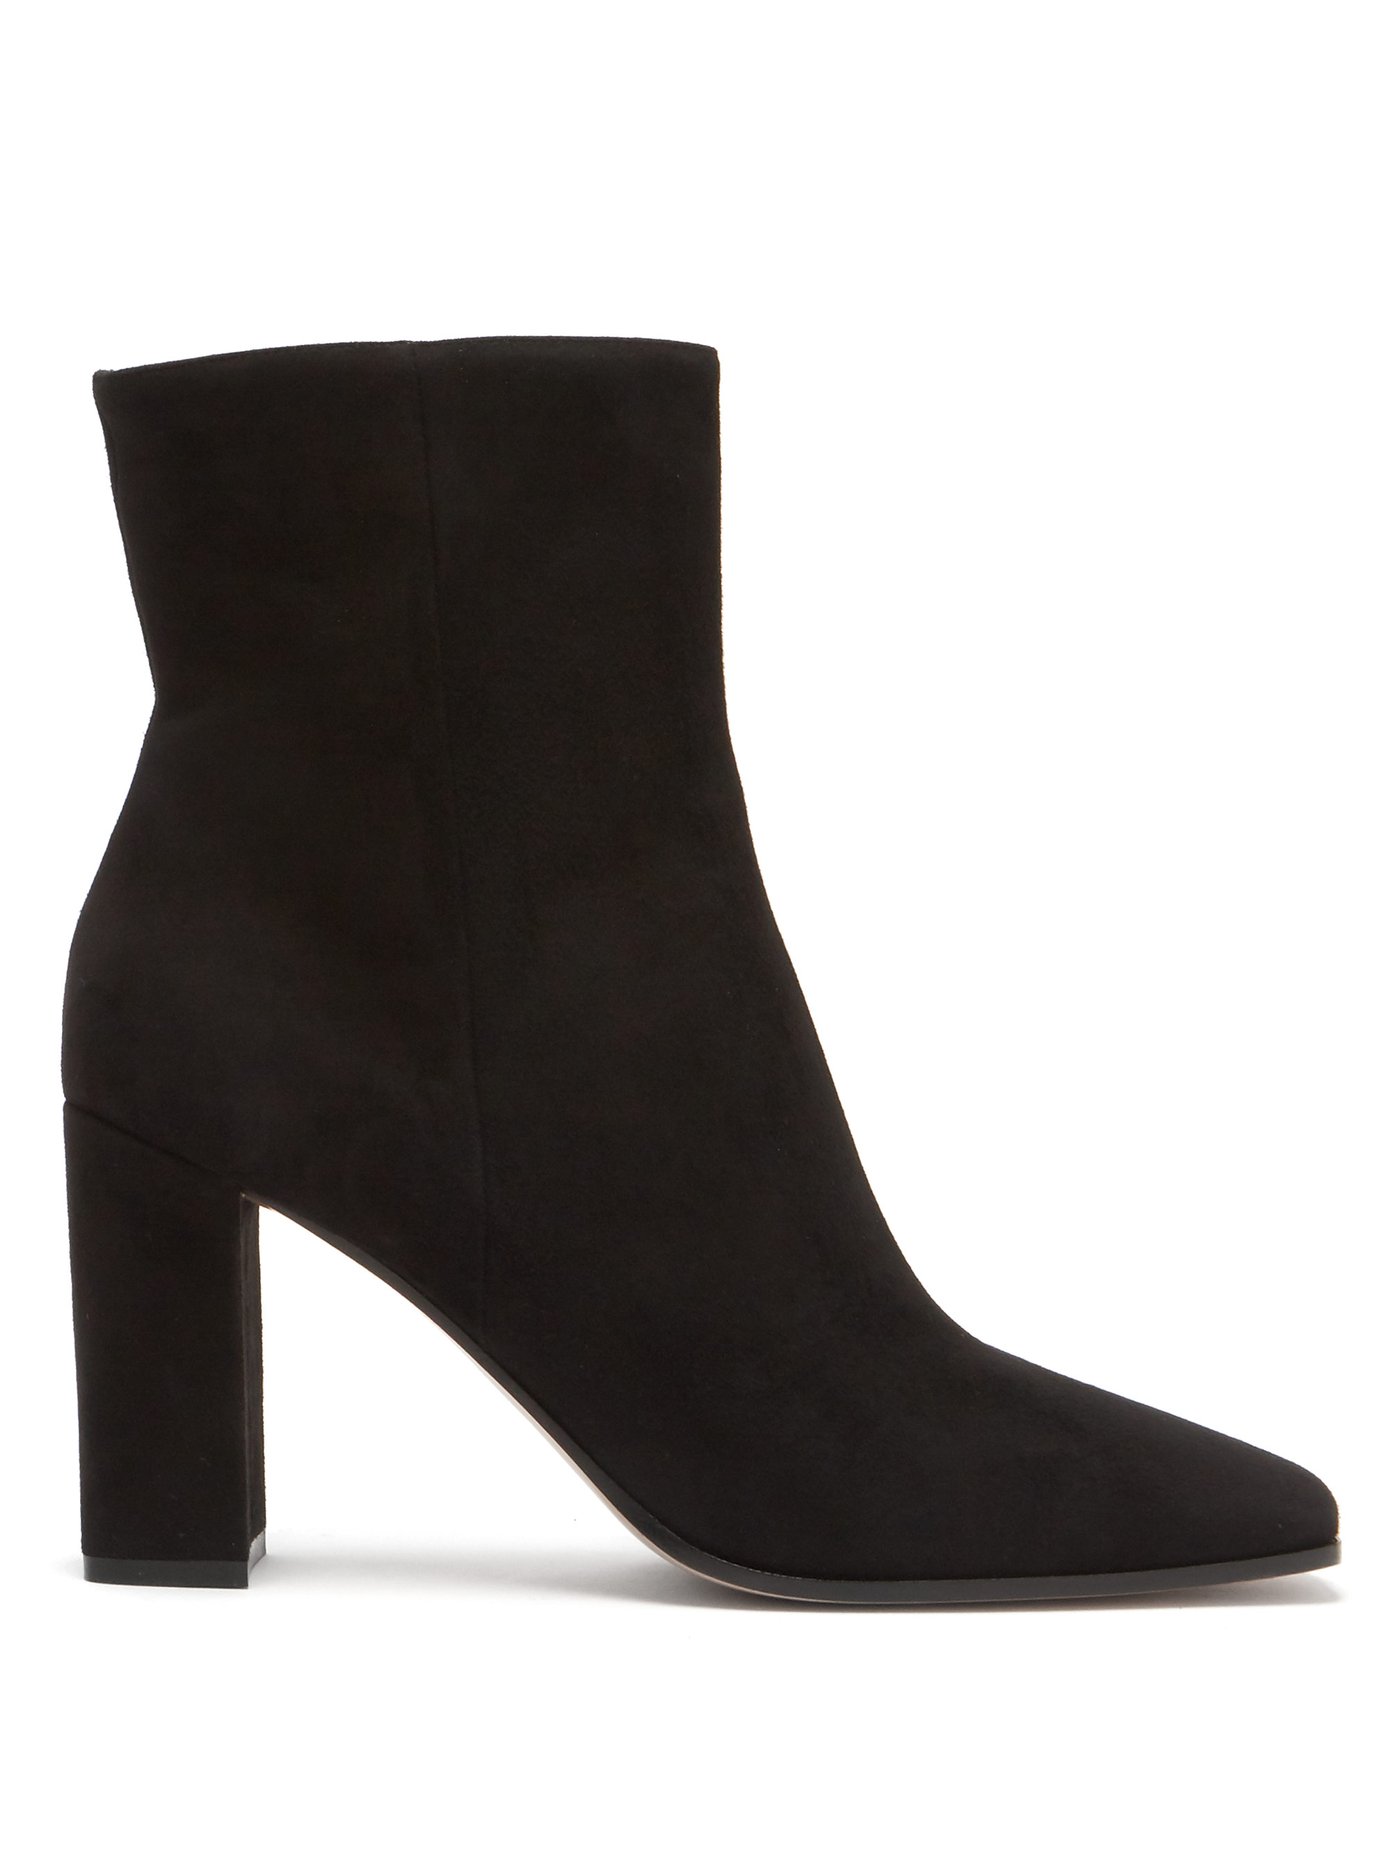 gianvito rossi suede ankle boots